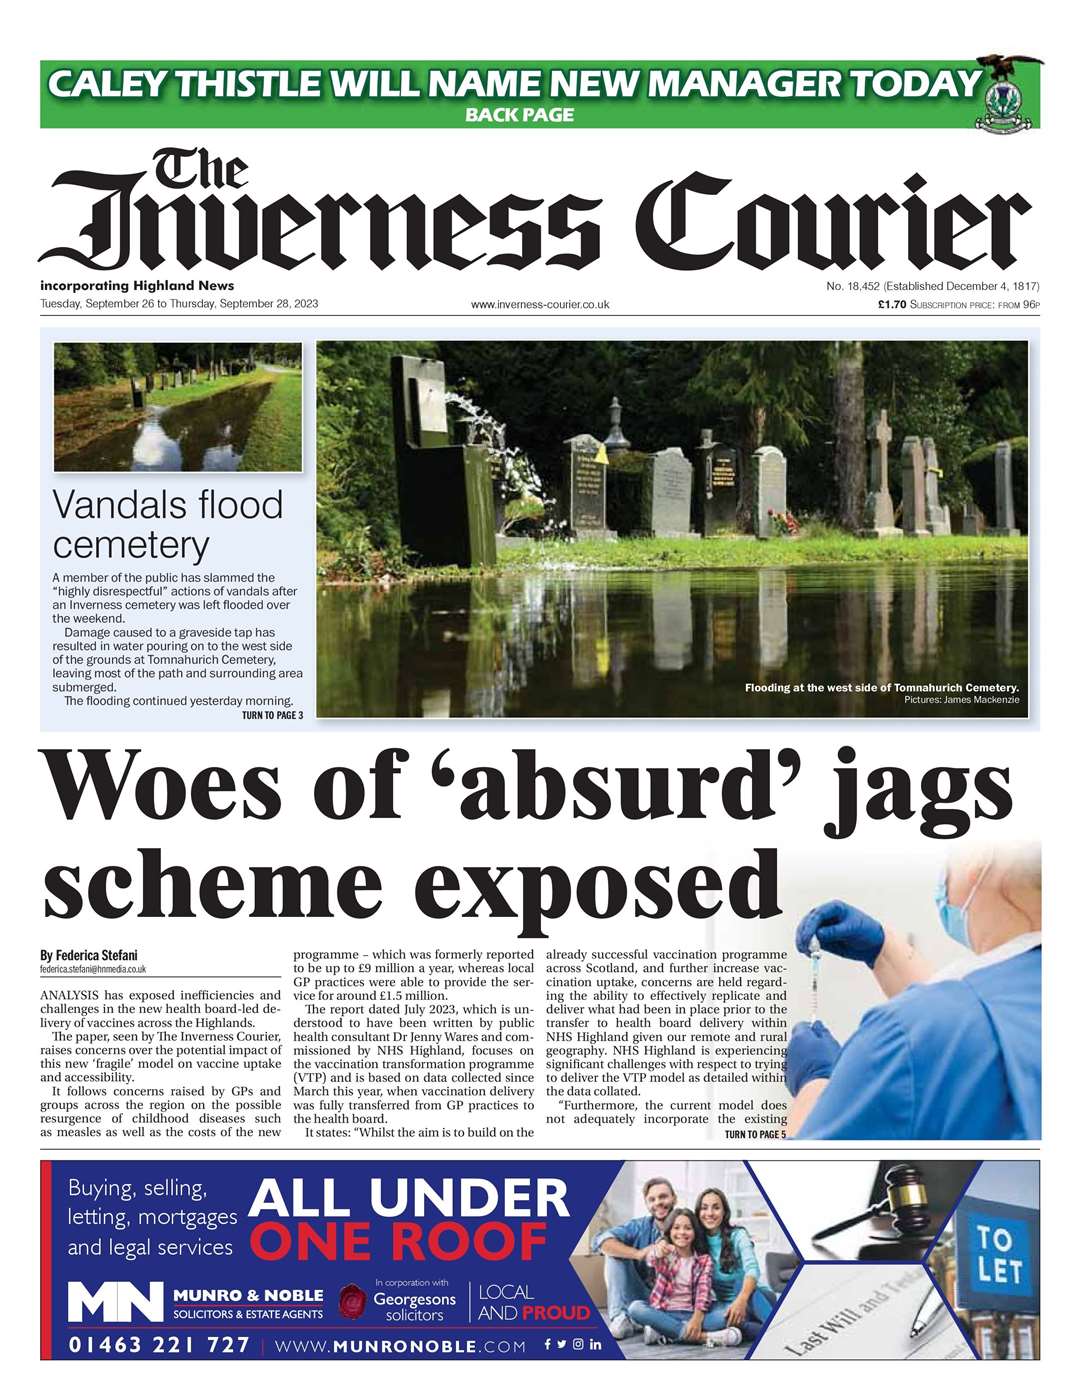 The Inverness Courier, September 26, front page.